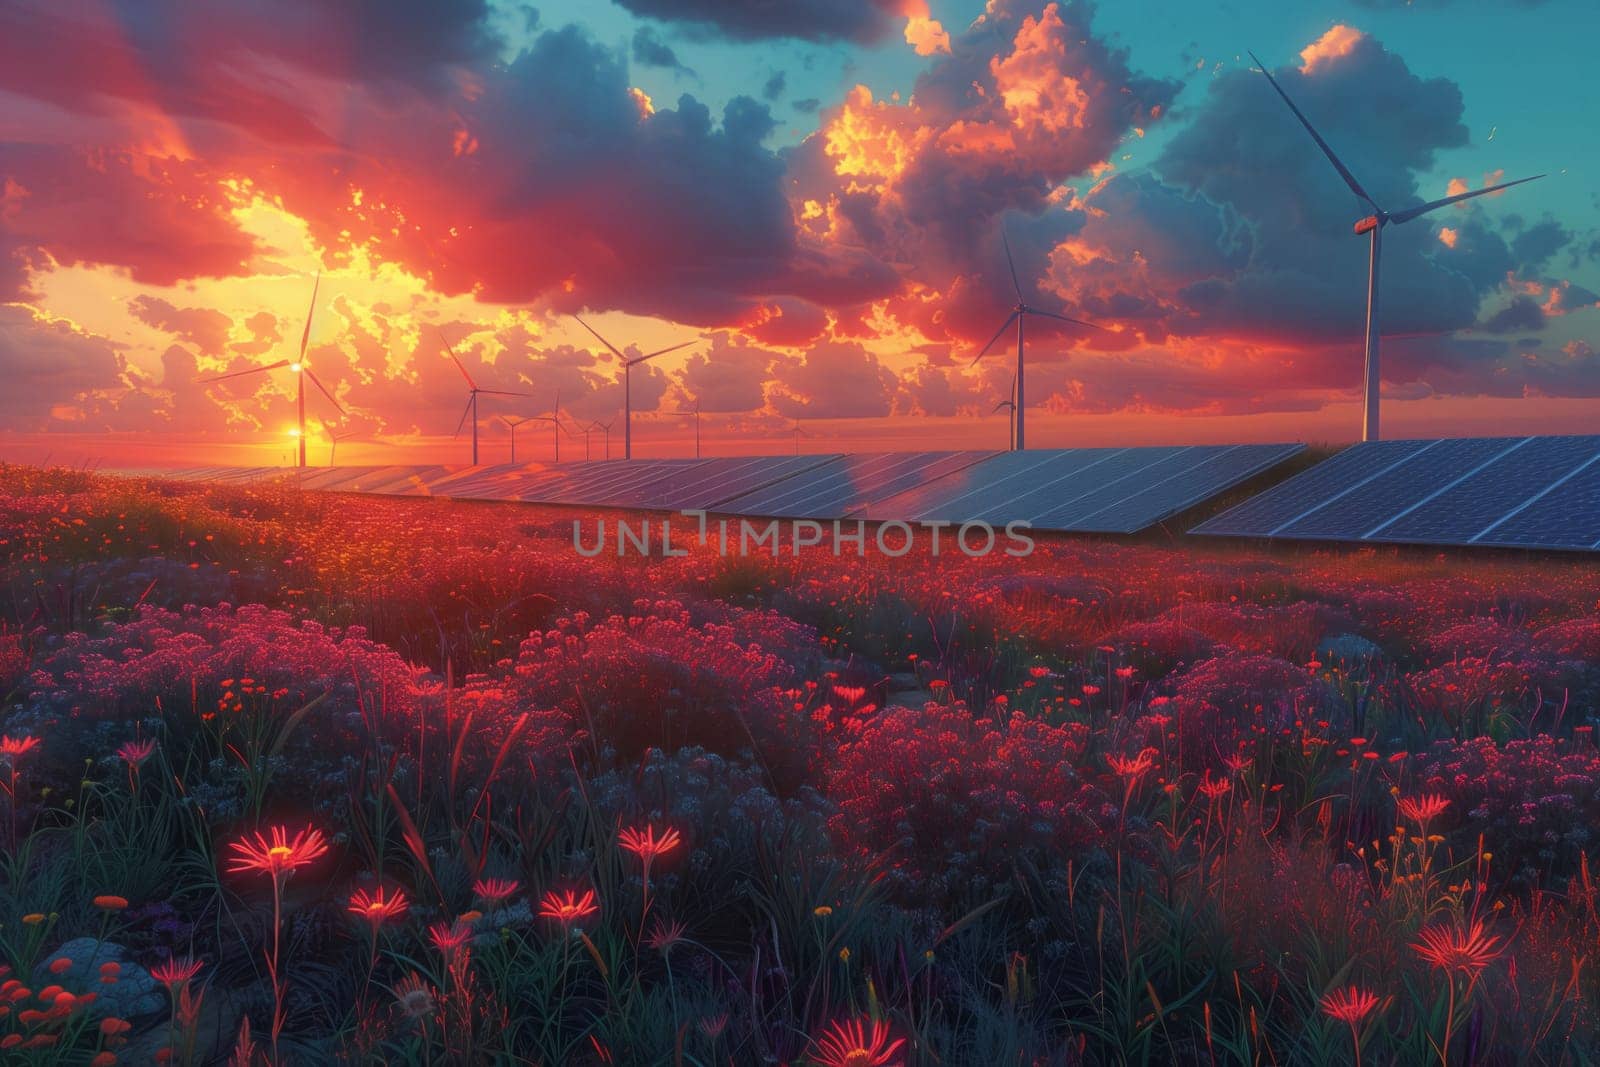 Field of flowers with windmills and solar panels at sunset by richwolf